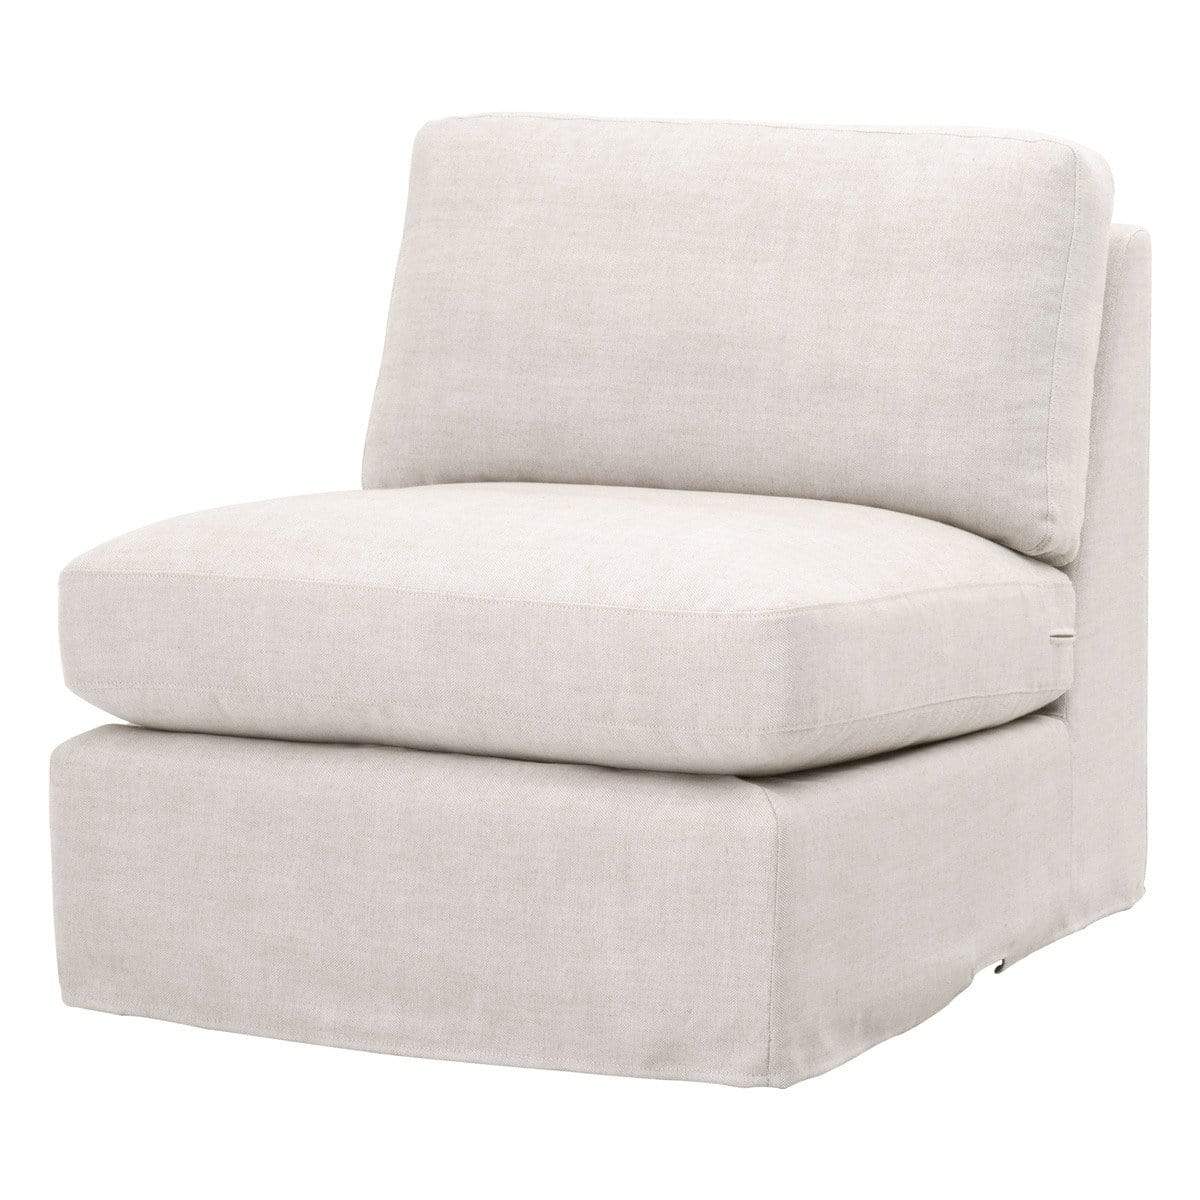 BLU Home Lena Modular Slope Arm Slipcover 1-Seat Armless Chair Sofas orient-express-6603-1S.BISQ